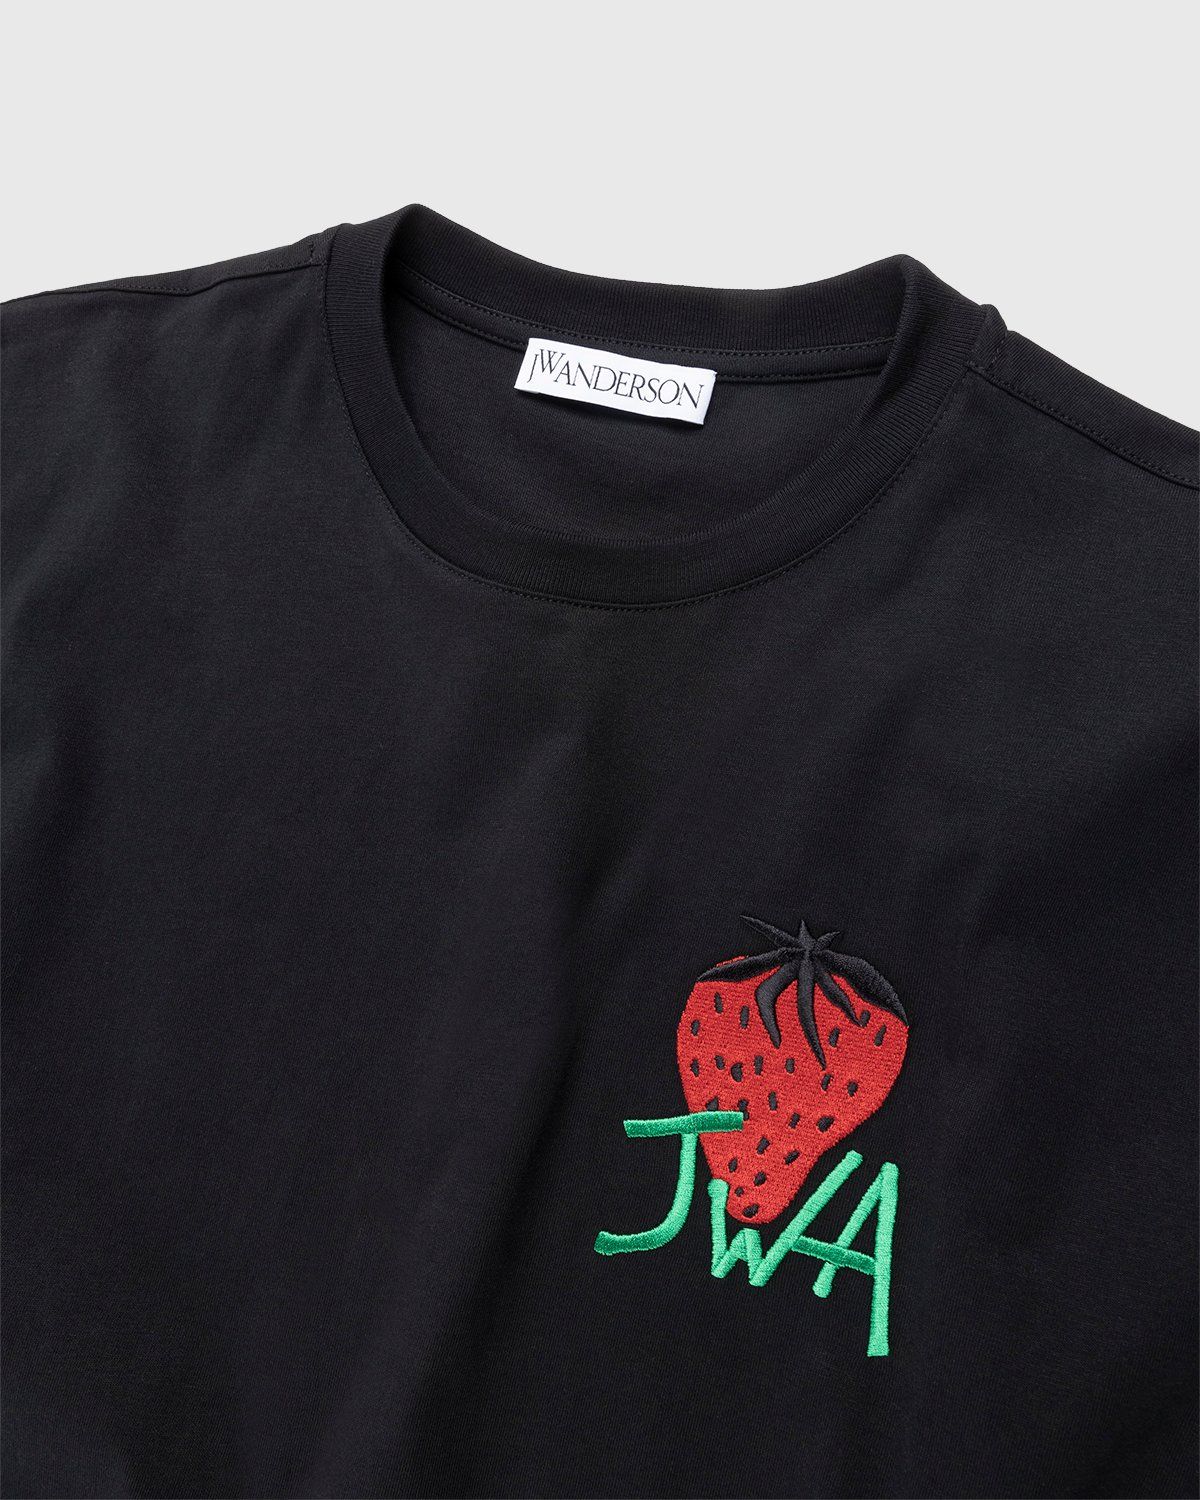 J.W. Anderson – Embroidered Strawberry JWA T-Shirt Black - Tops - Black - Image 3